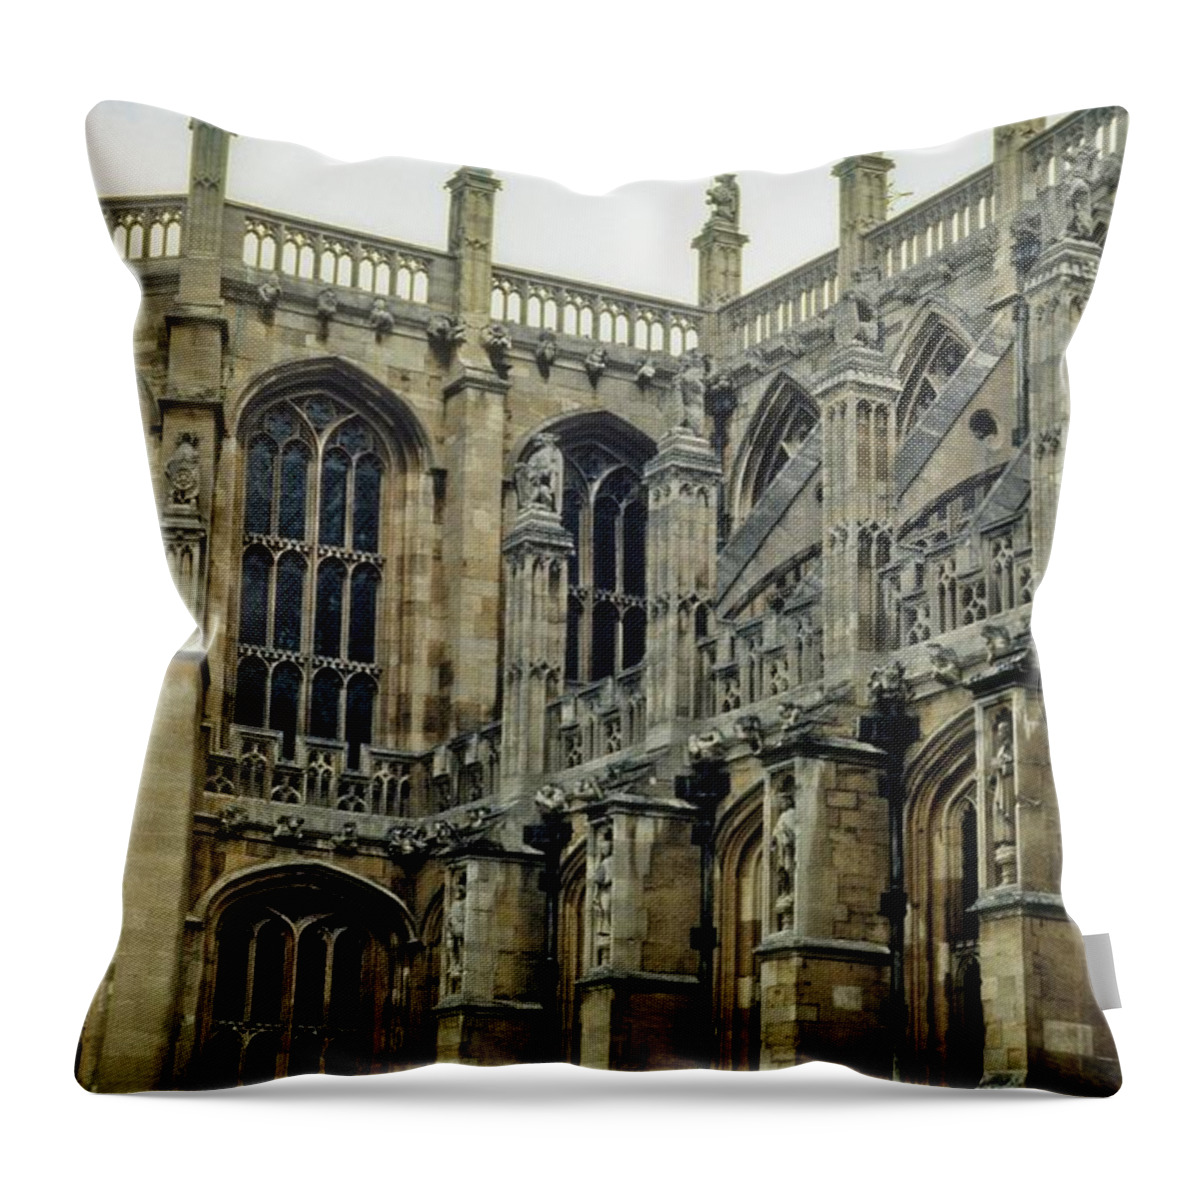 S_7ab3a5zqn021 Throw Pillow featuring the photograph A Solid Buttressed Architecture by Douglas Barnett